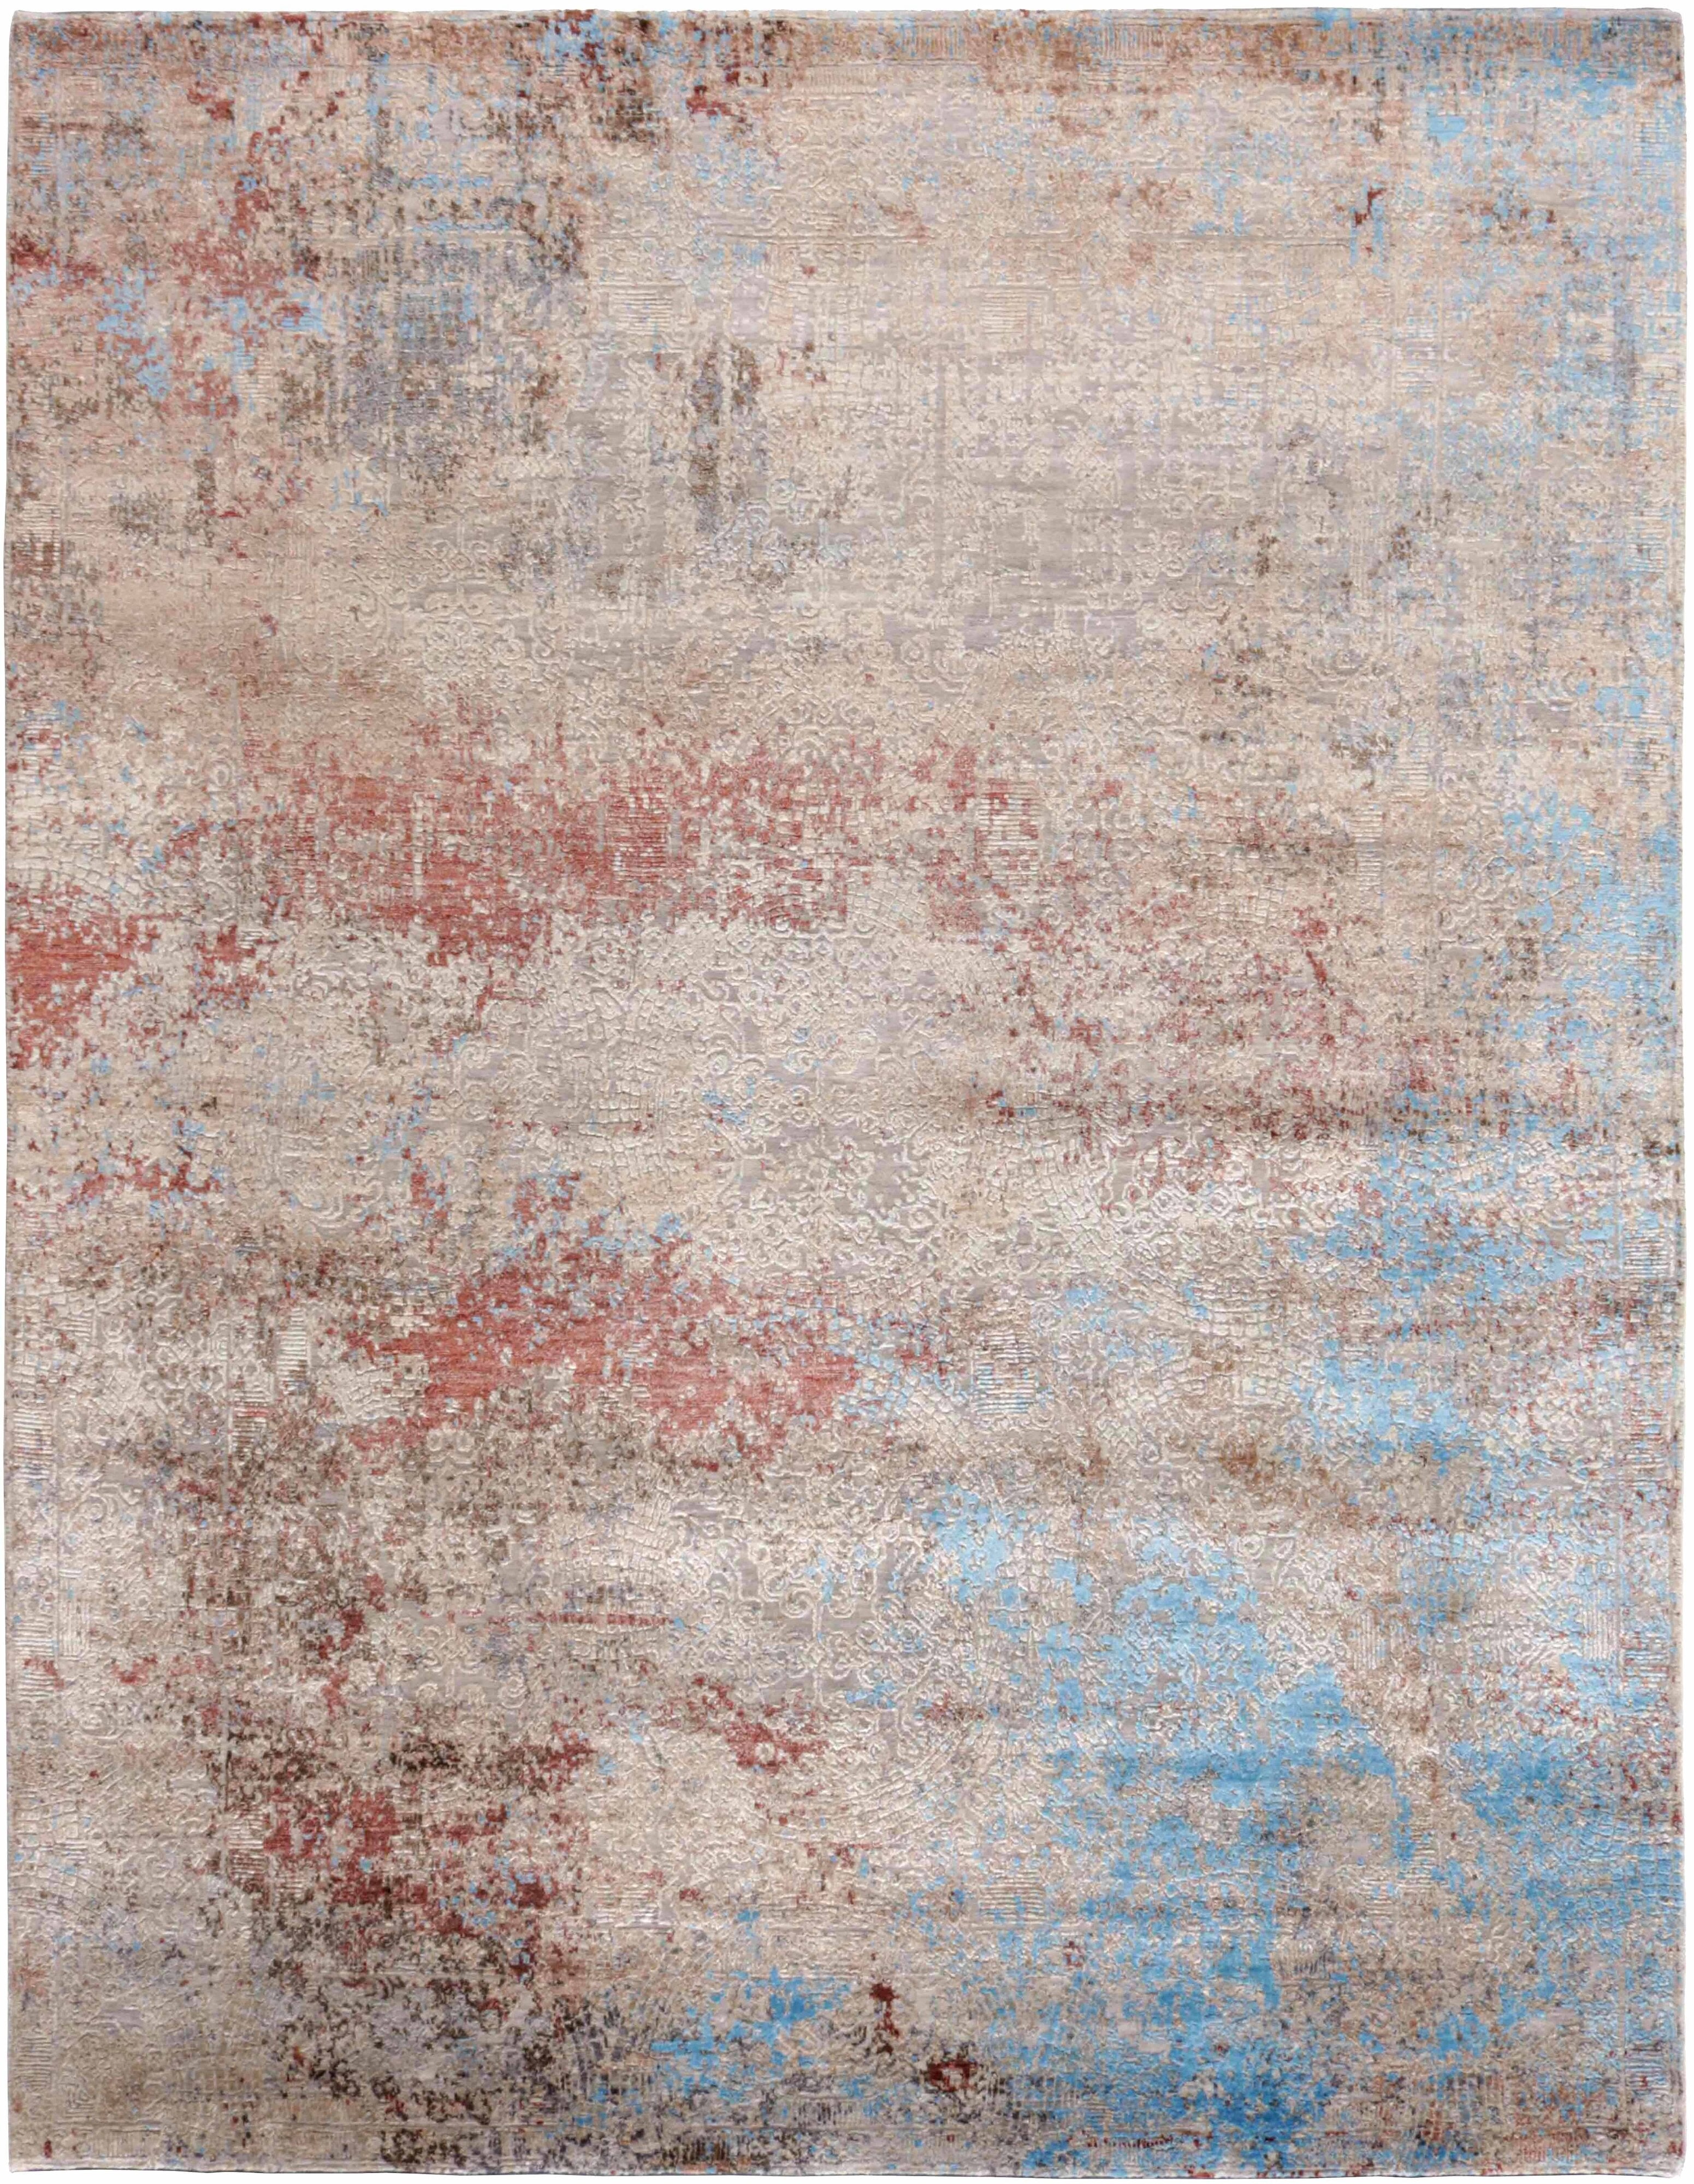 Large area rug with abstract design in grey, beige, red and blue